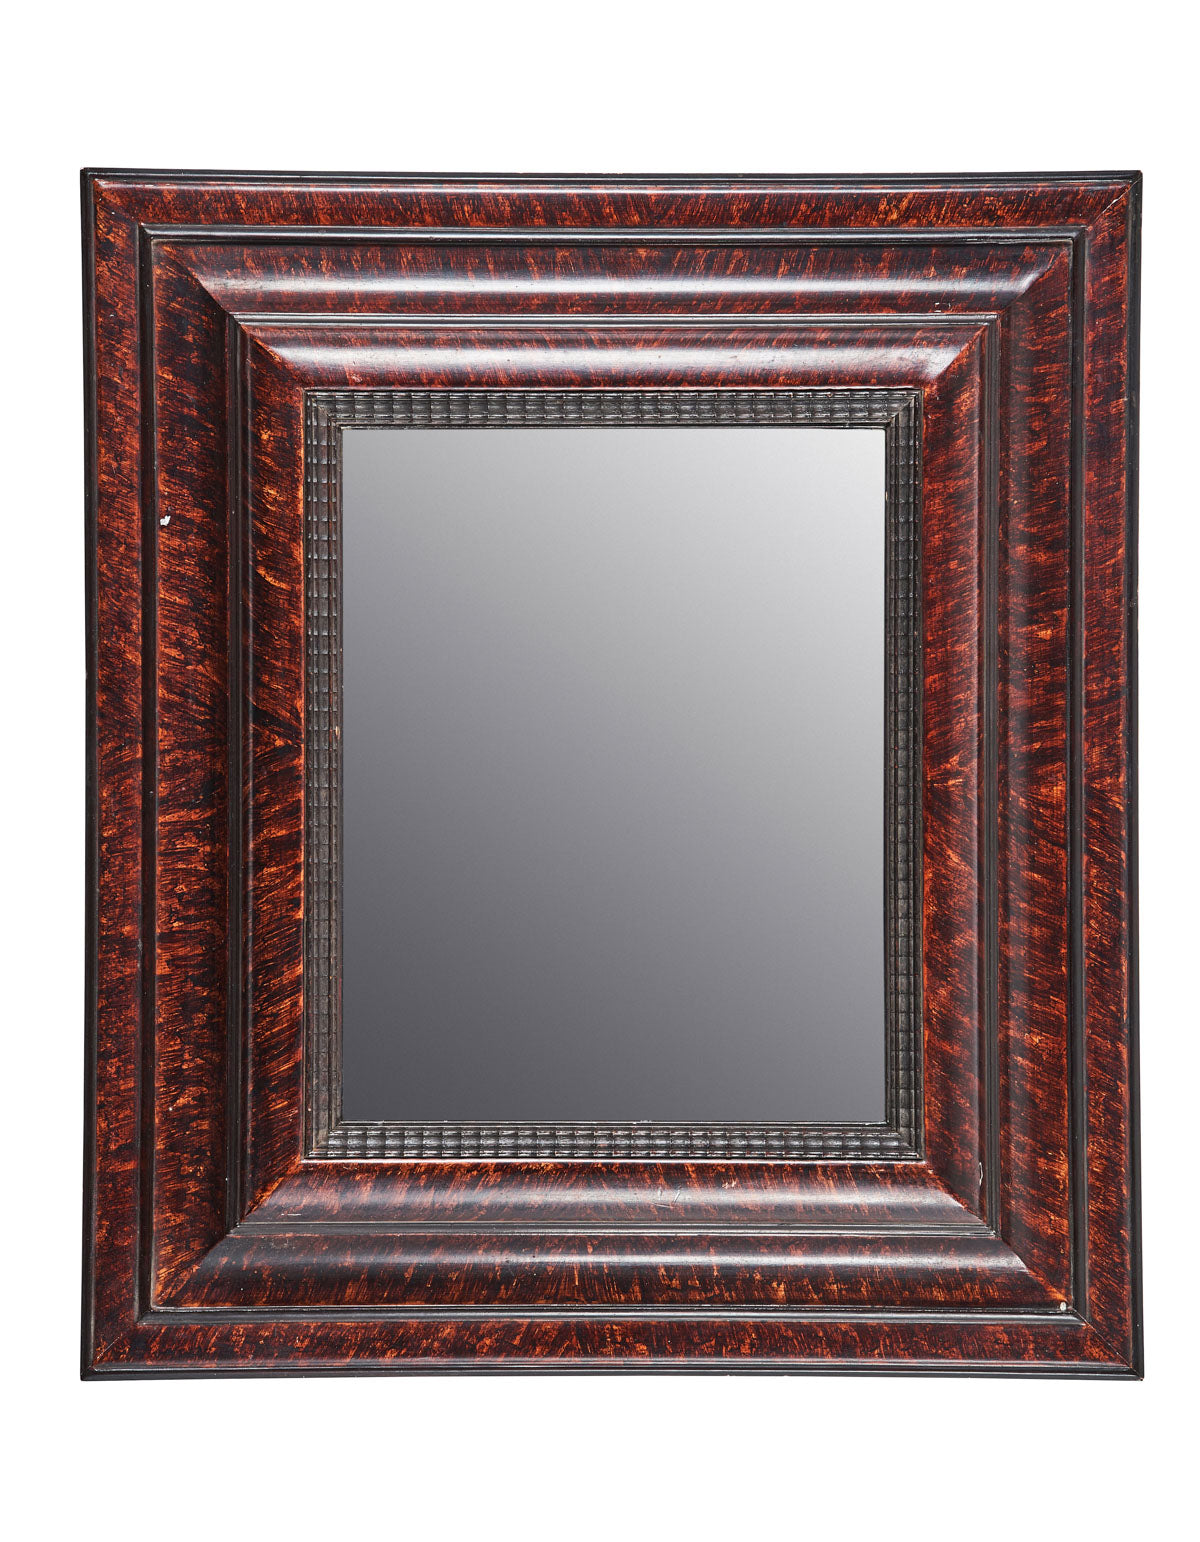 SOLD A very decorative faux-tortoiseshell painted mirror, Flemish 19th Century